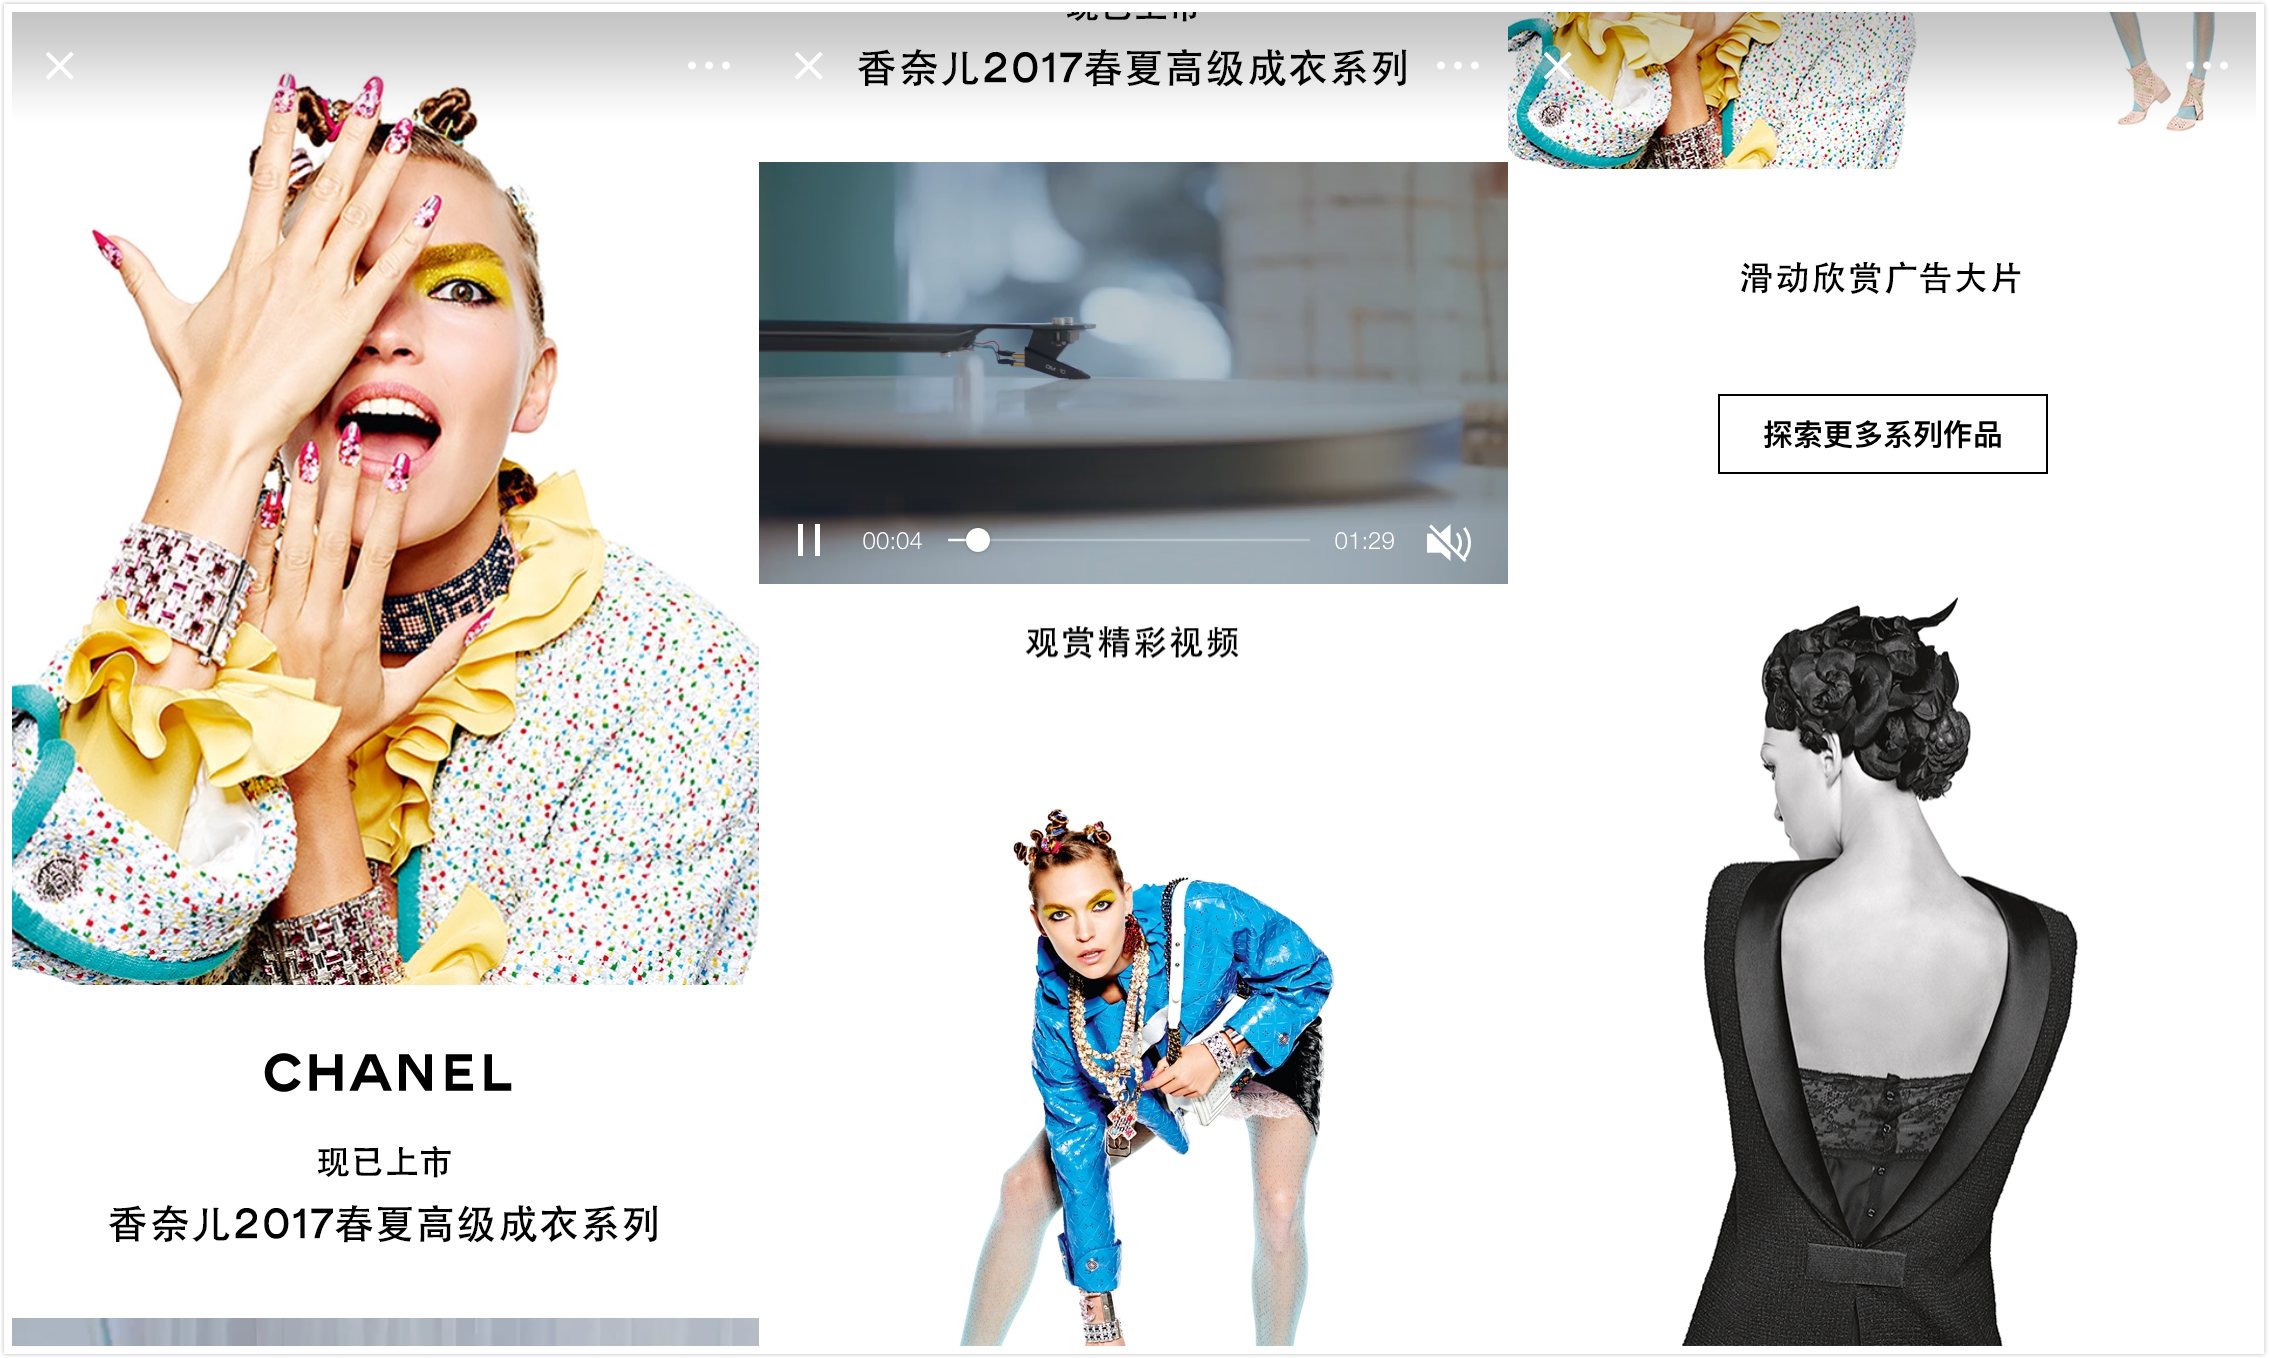 Luxury Brands Are Beginning to Embrace WeChat's New Multimedia Moments Ads